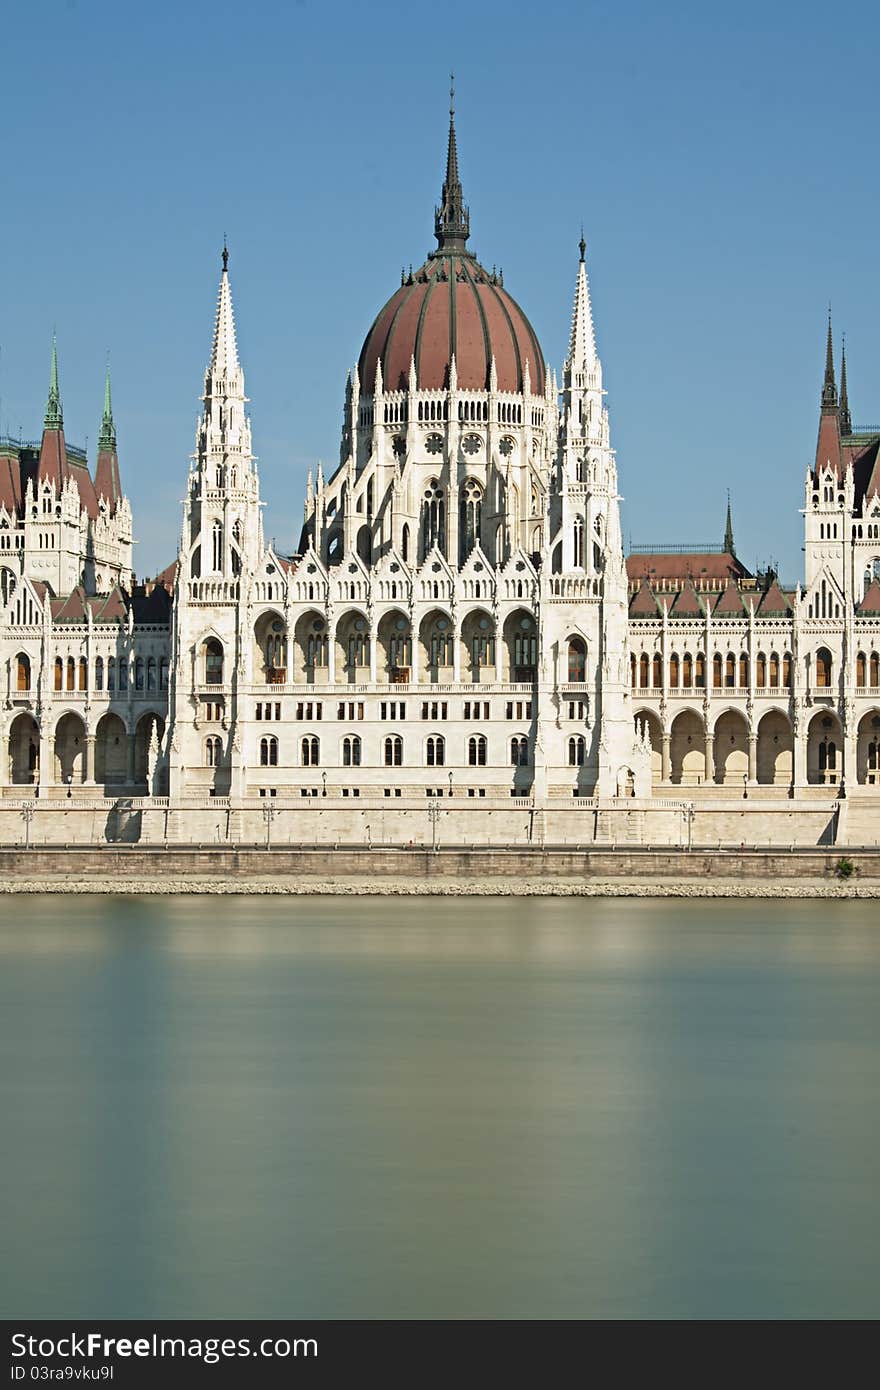 Central portion of the Hungarian parliament building on the blue river danube in Budapest Hungary. Central portion of the Hungarian parliament building on the blue river danube in Budapest Hungary